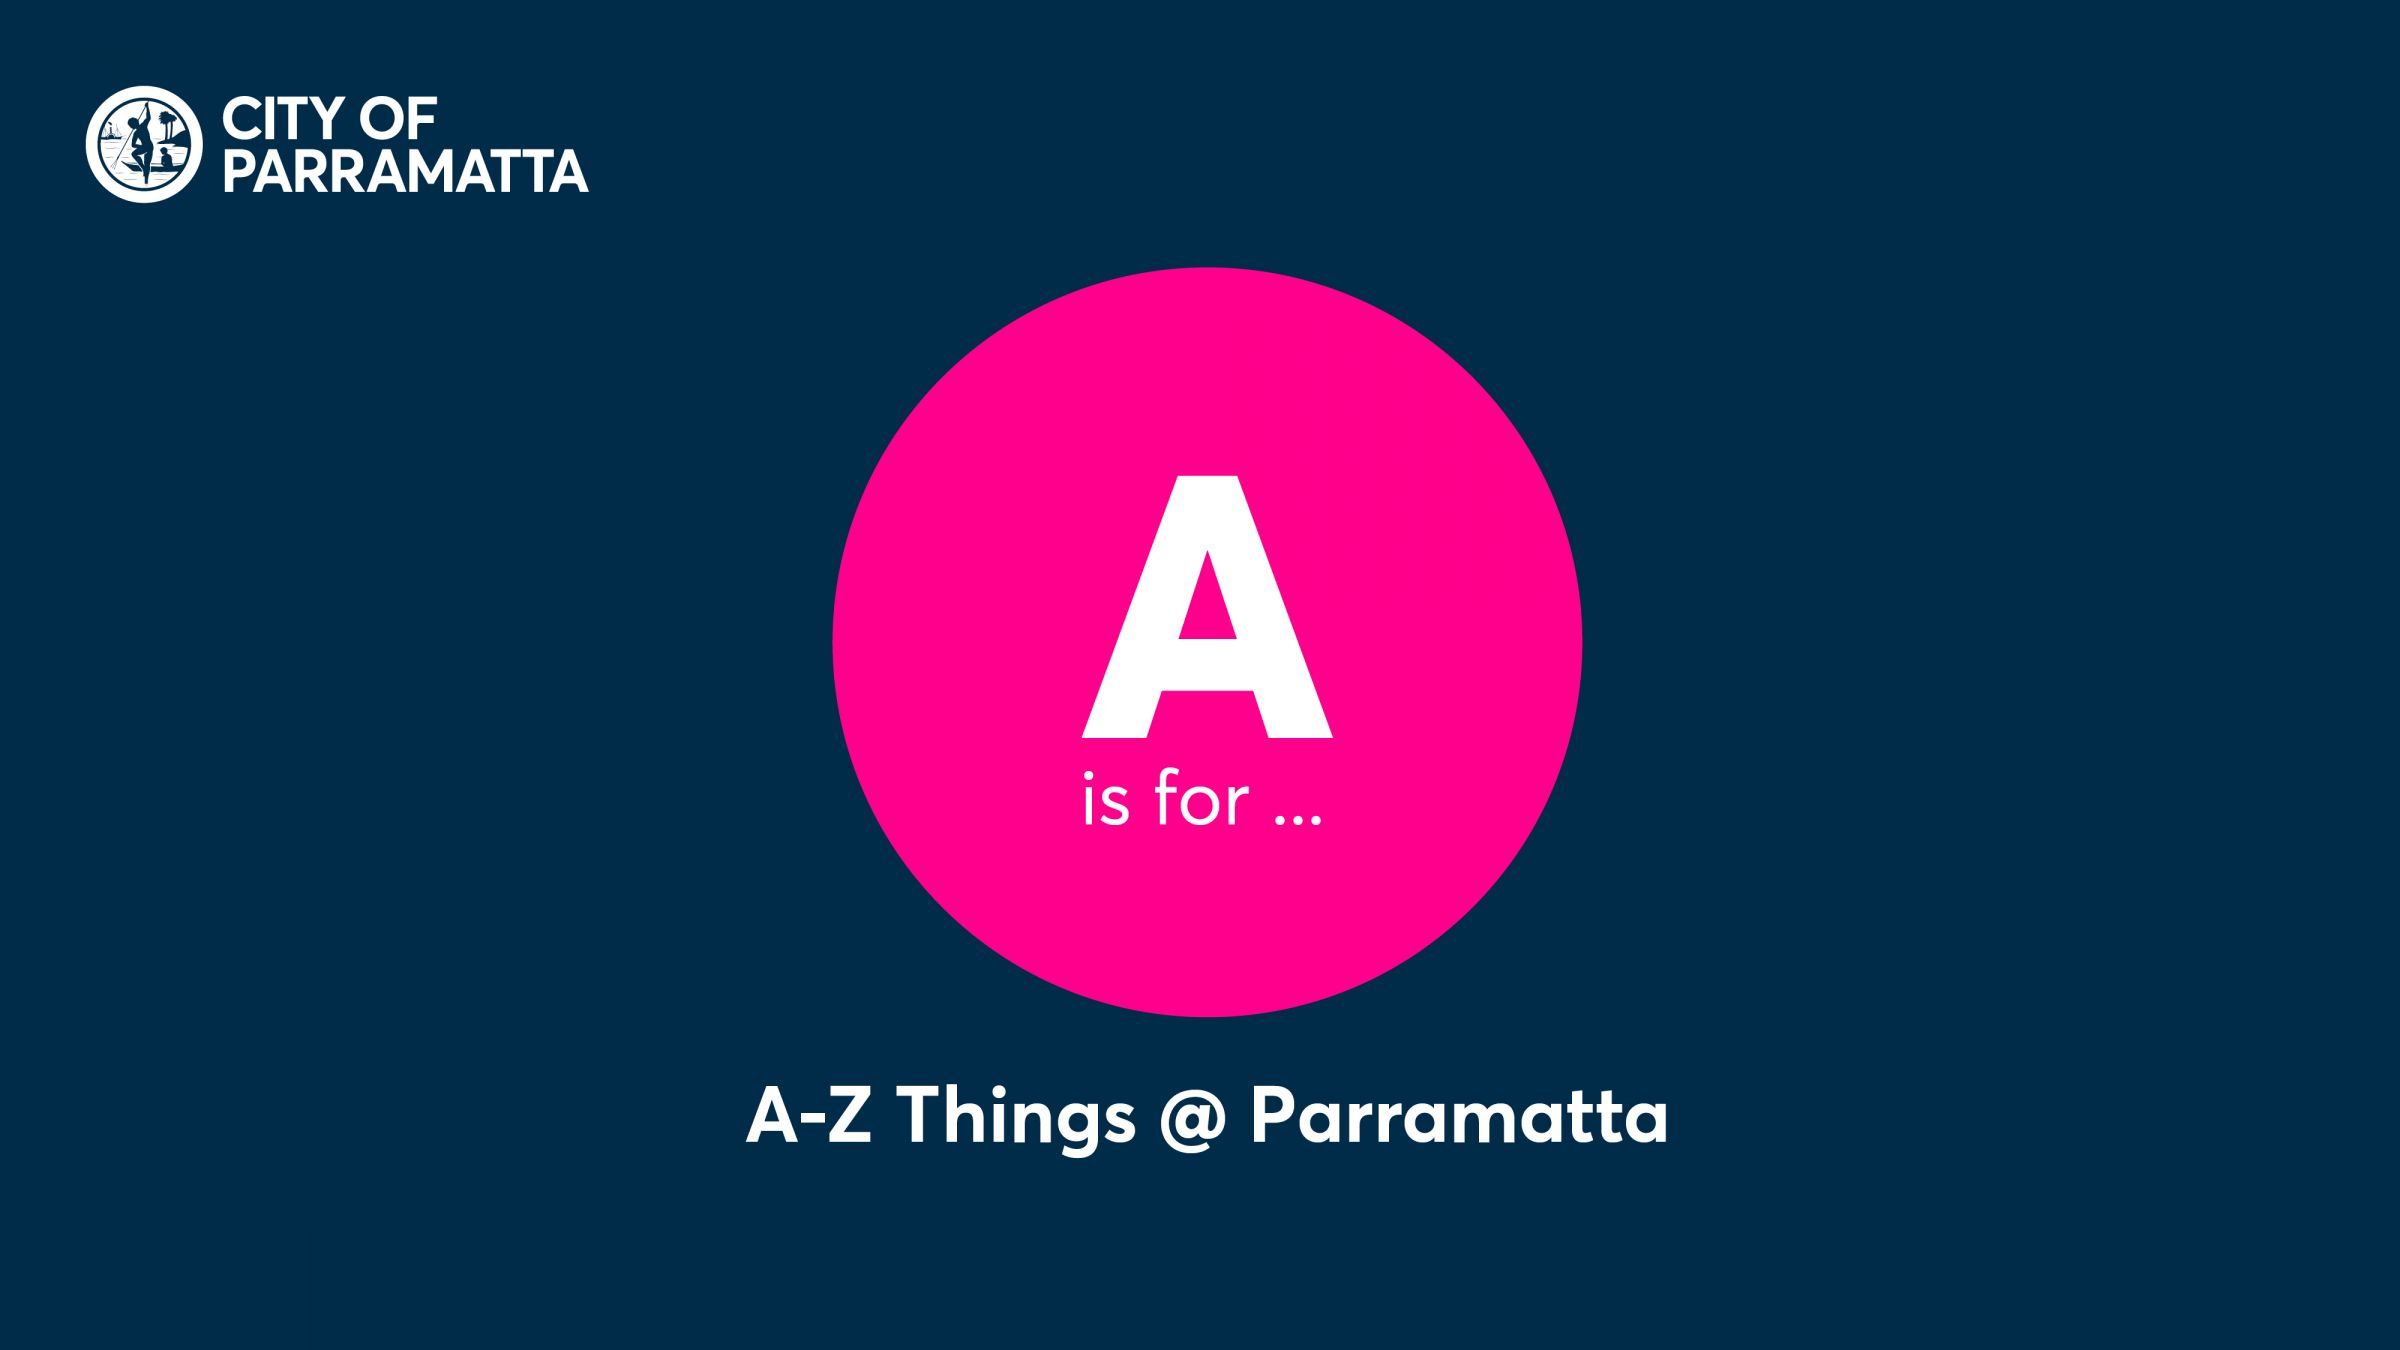 A is for... 